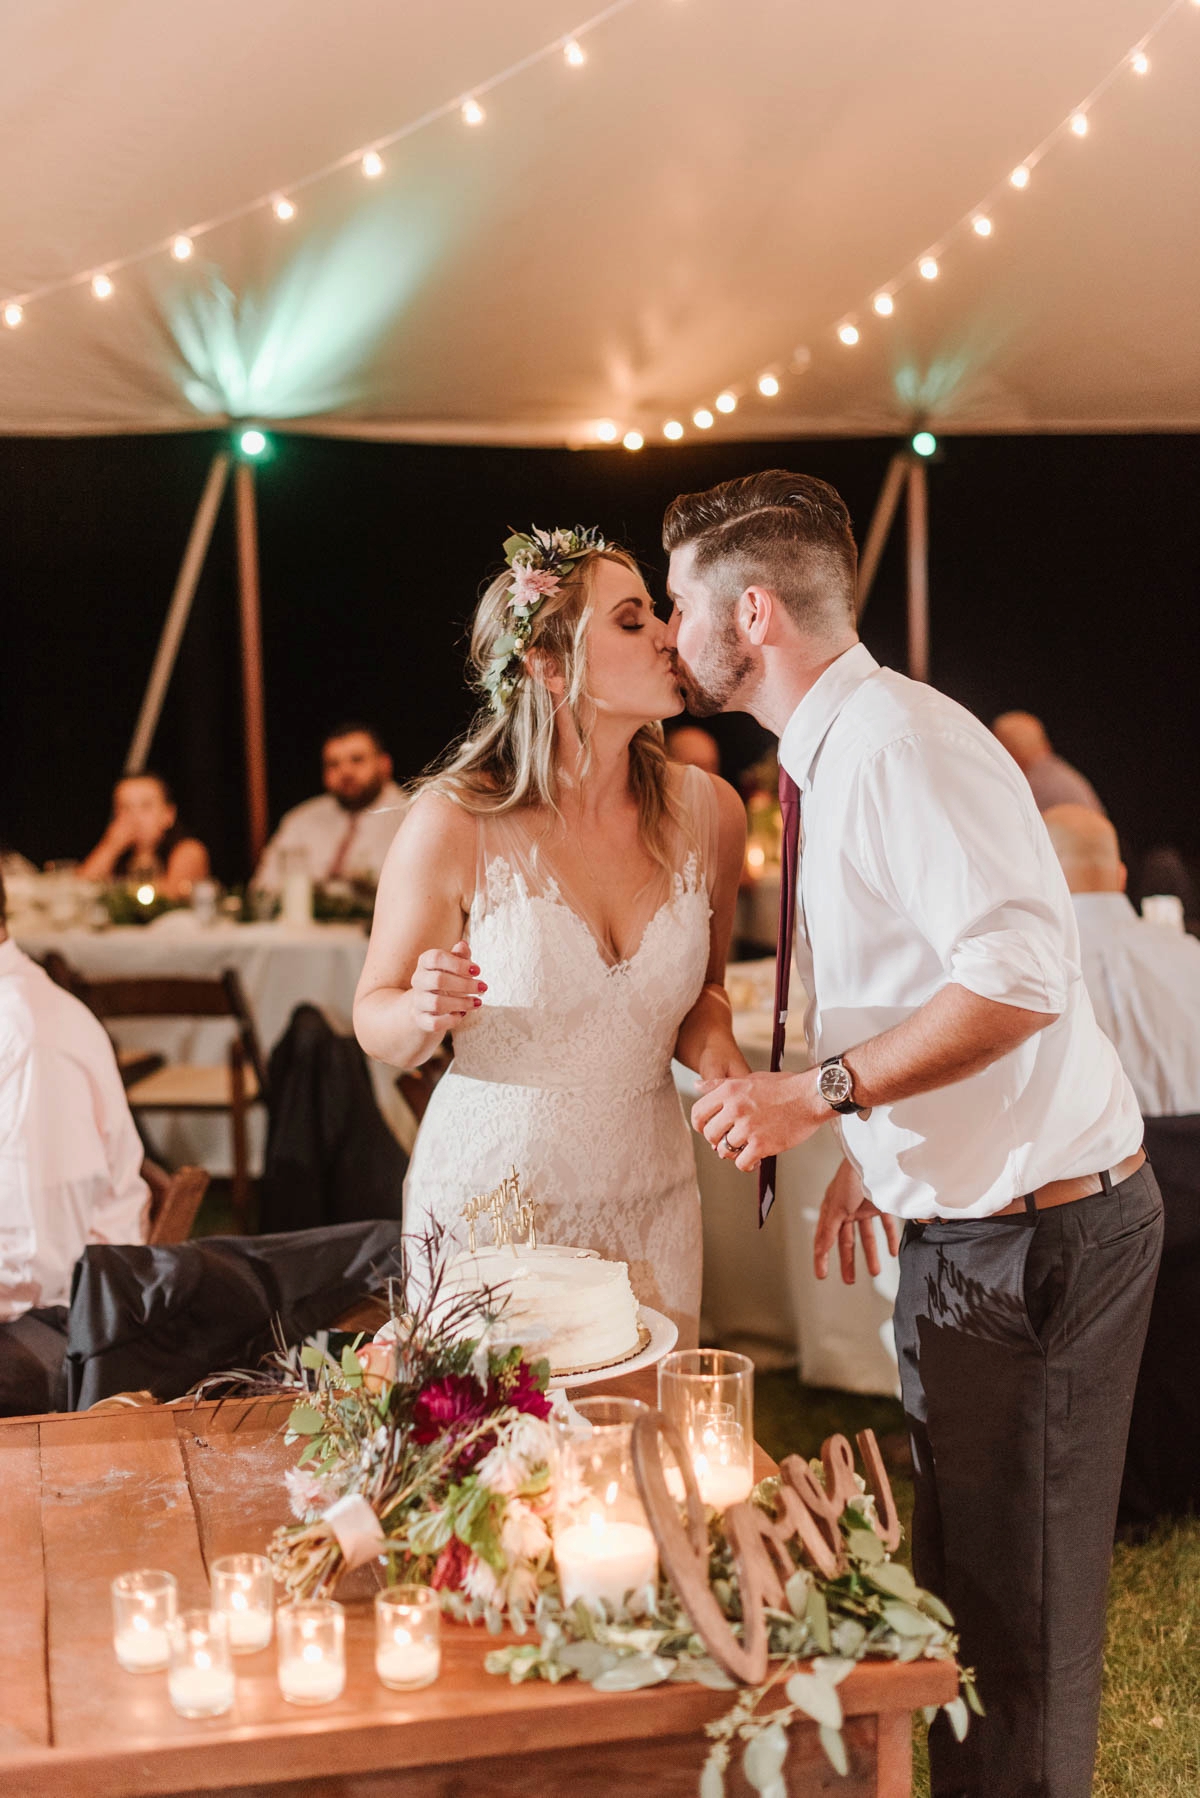 Summer Wedding at Mountain View Functions in Jaffrey, New Hampshire captured by Boston Wedding Photographer Annmarie Swift